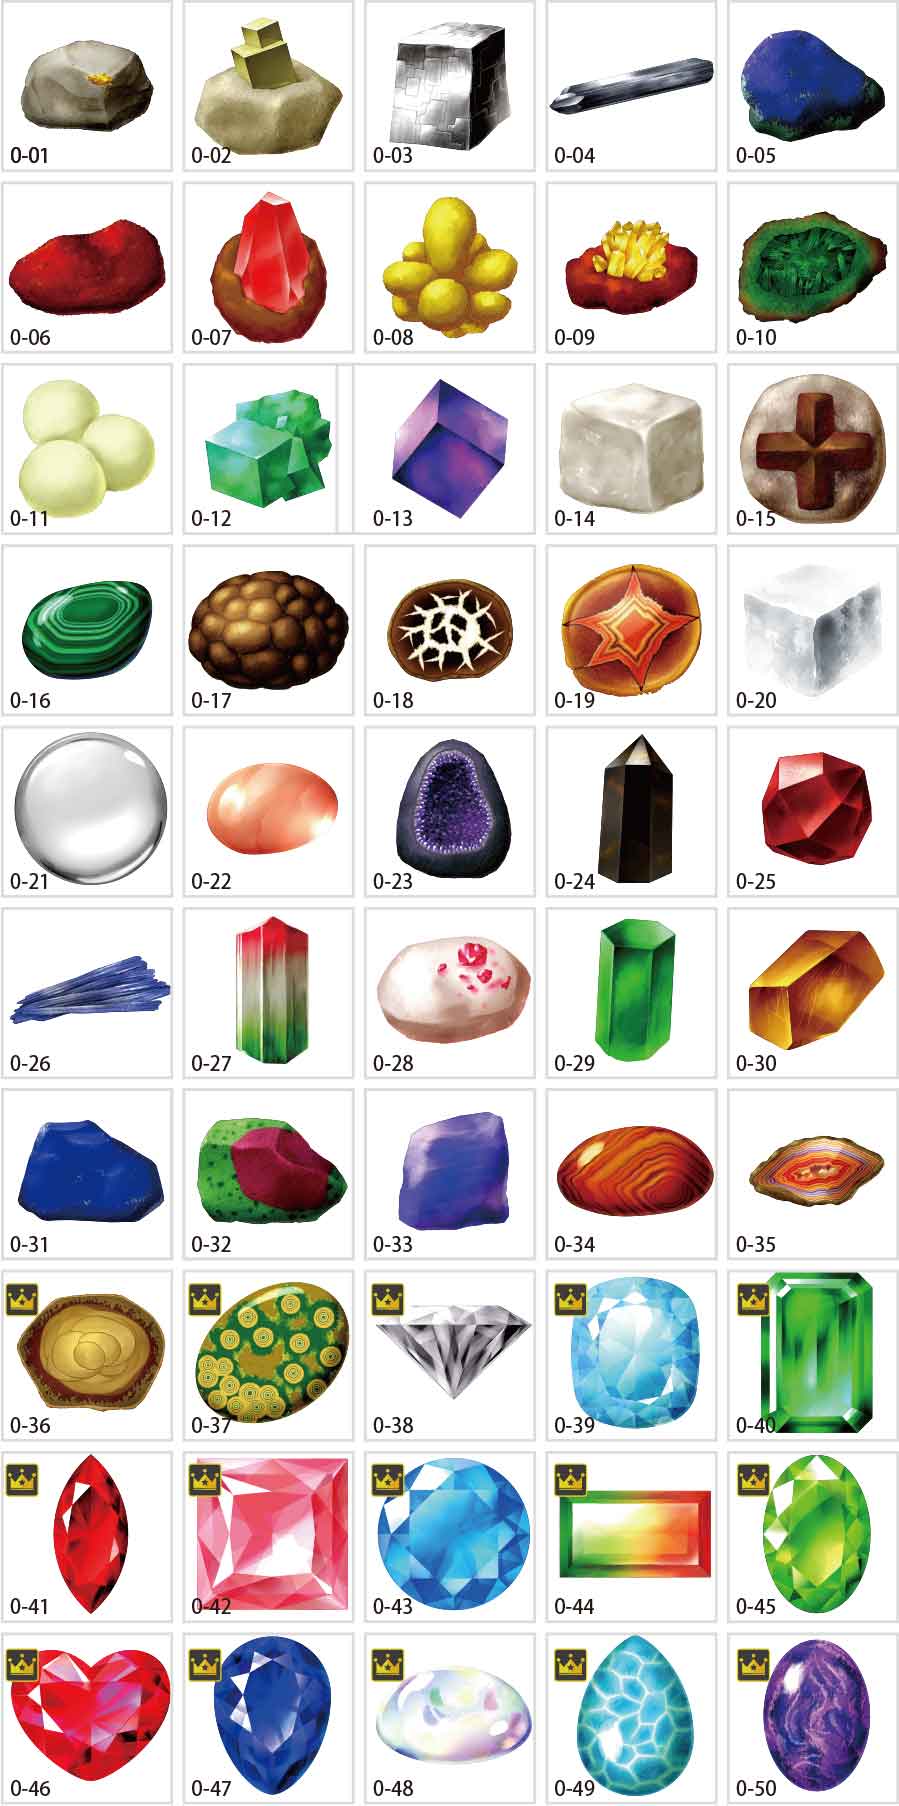 Illustration of gems and ores